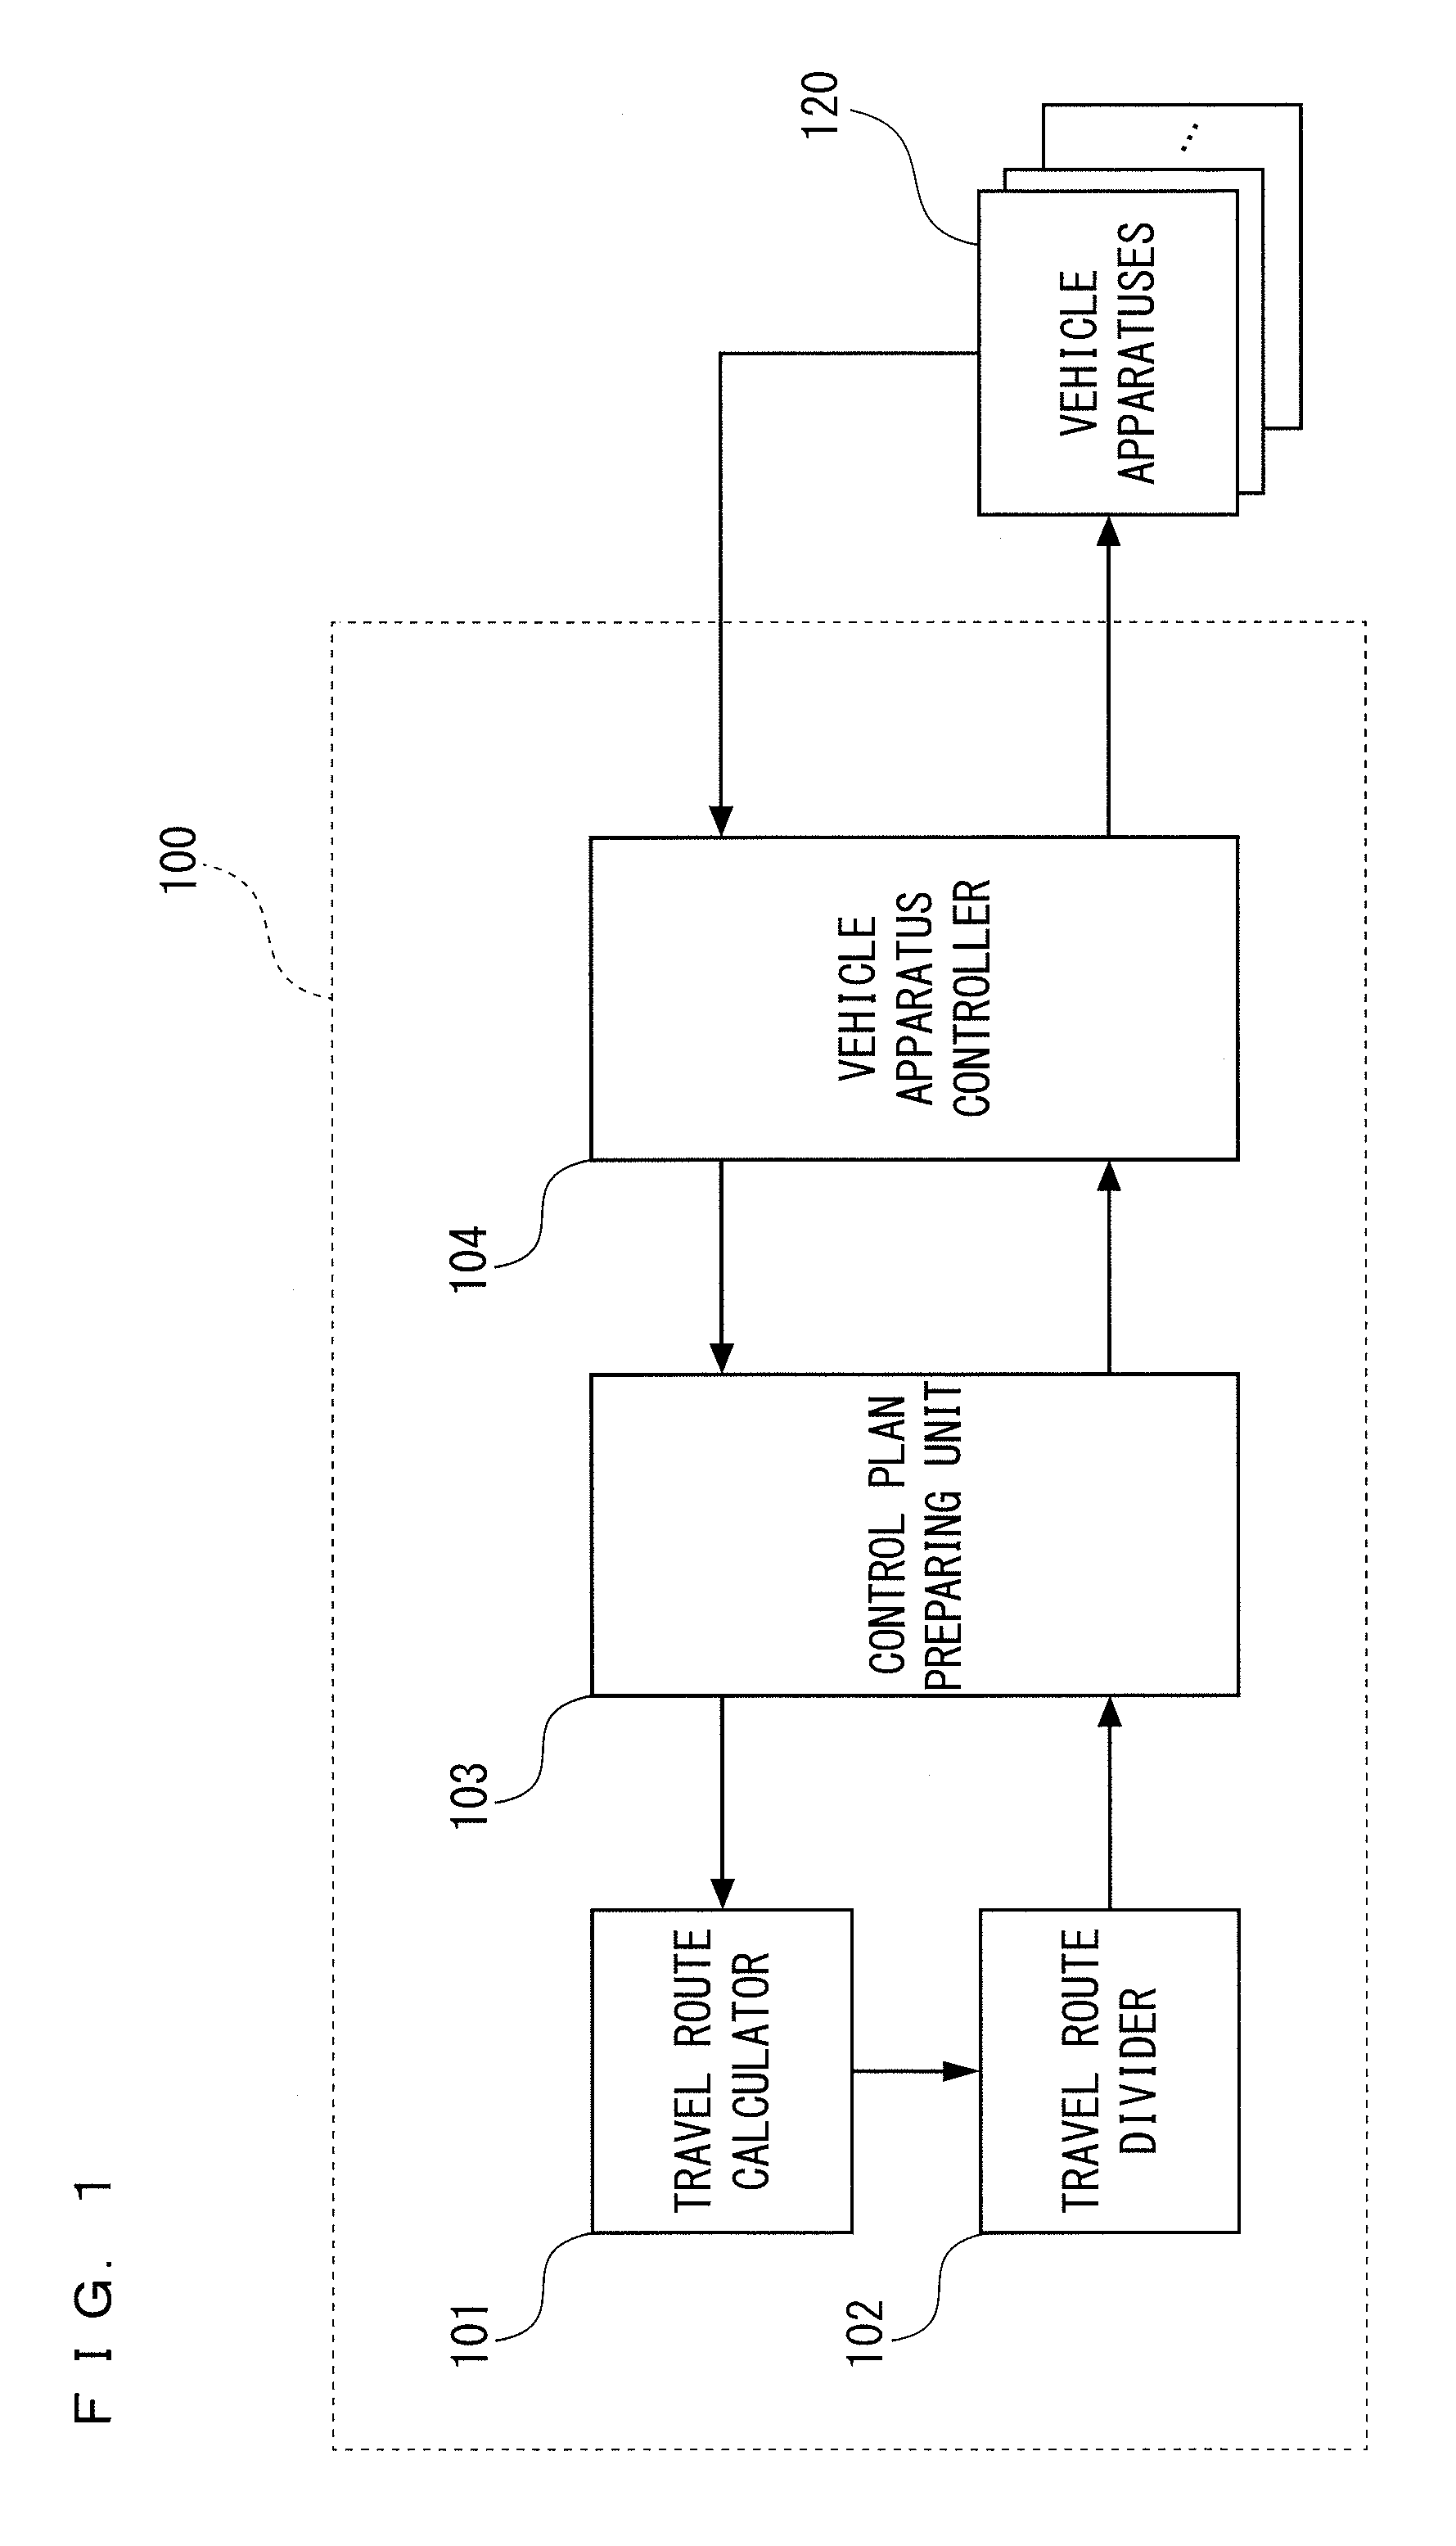 Vehicle energy-management device for controlling energy consumption along a travel route